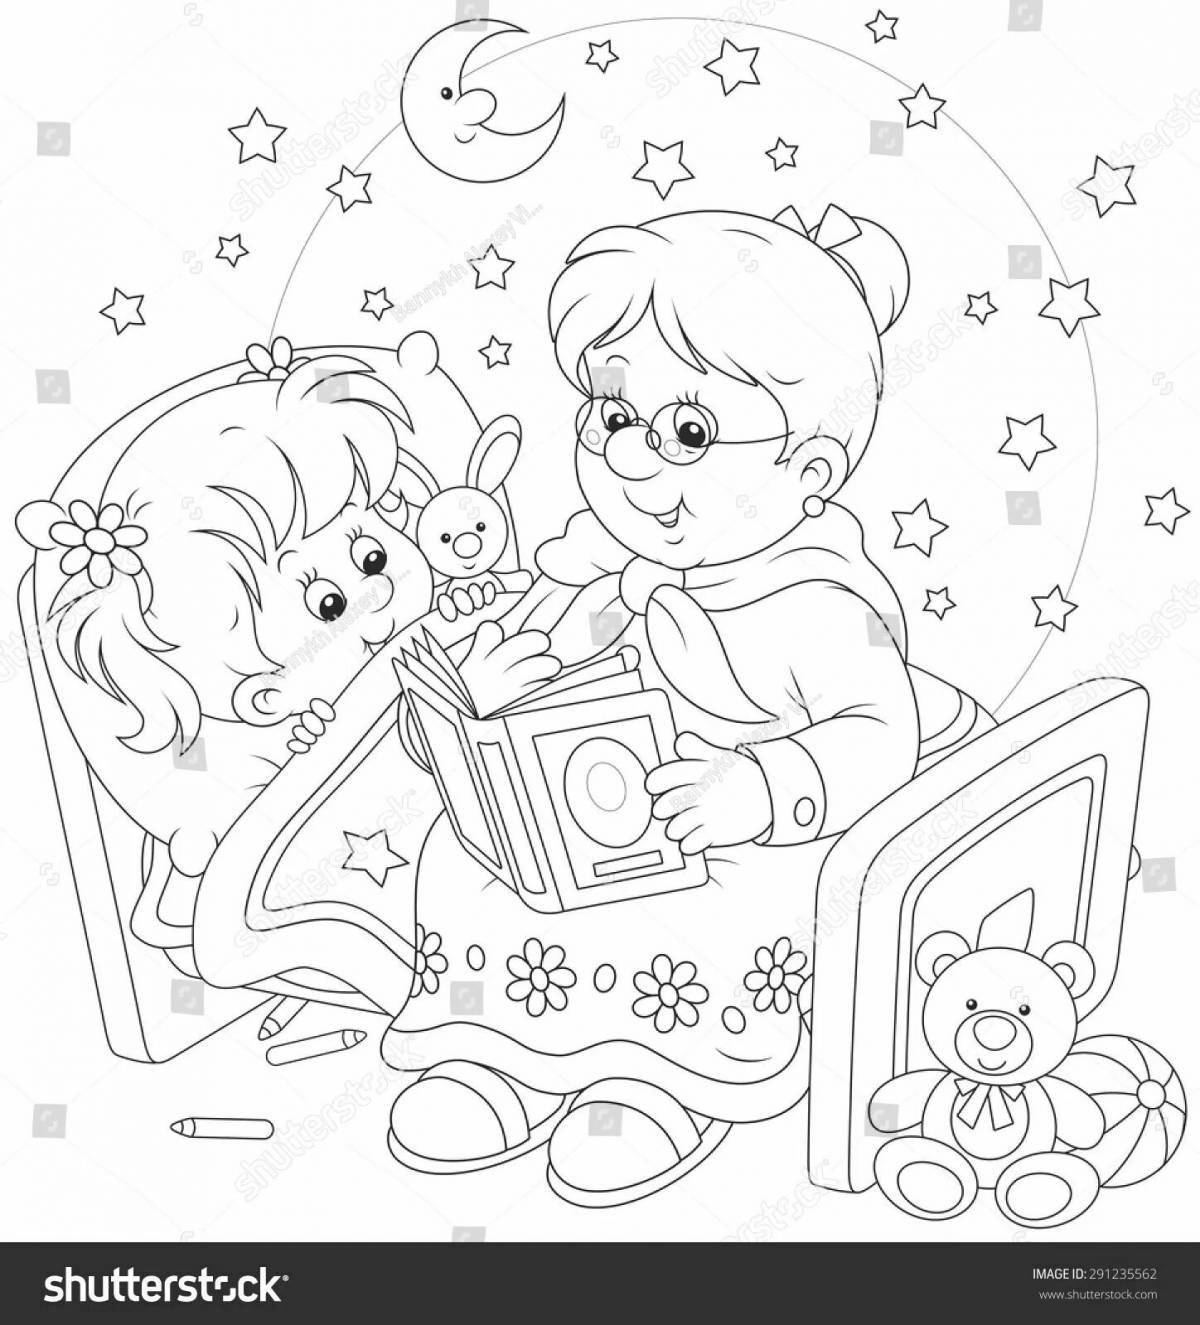 Coloring book playful grandmother and granddaughter